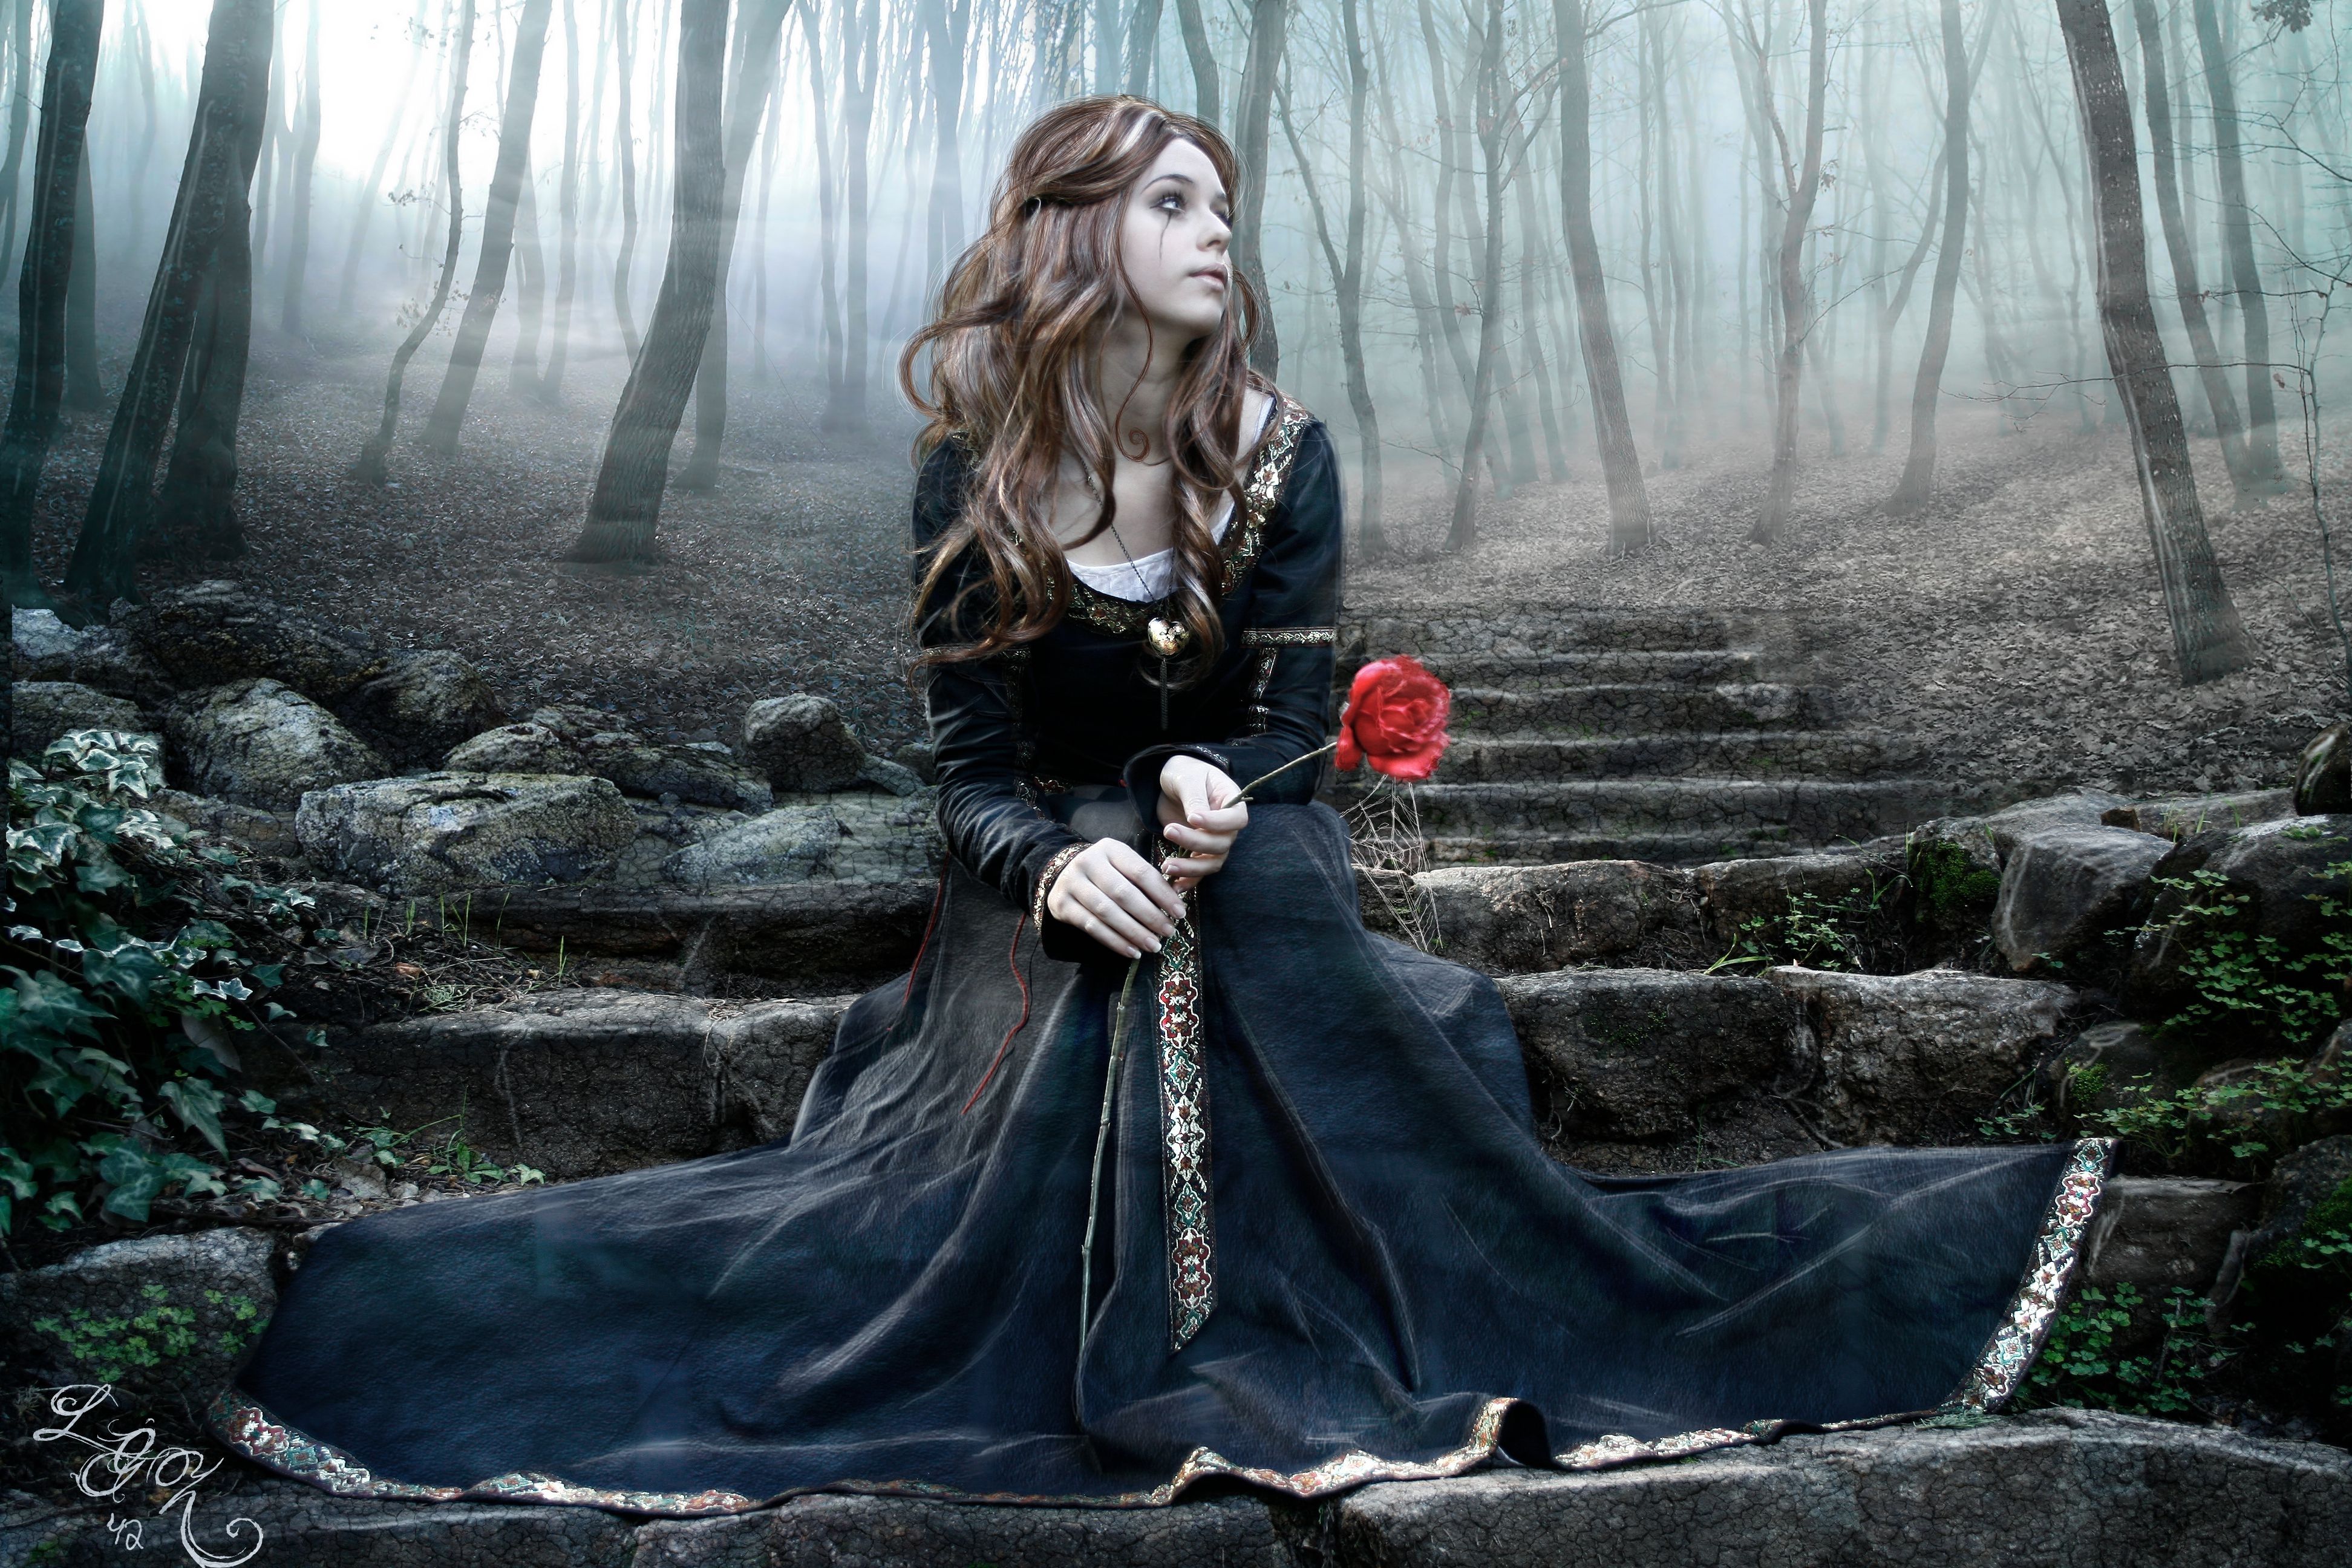 Goth Woman in a Long Black Dress Sitting on Stairs in a Foggy